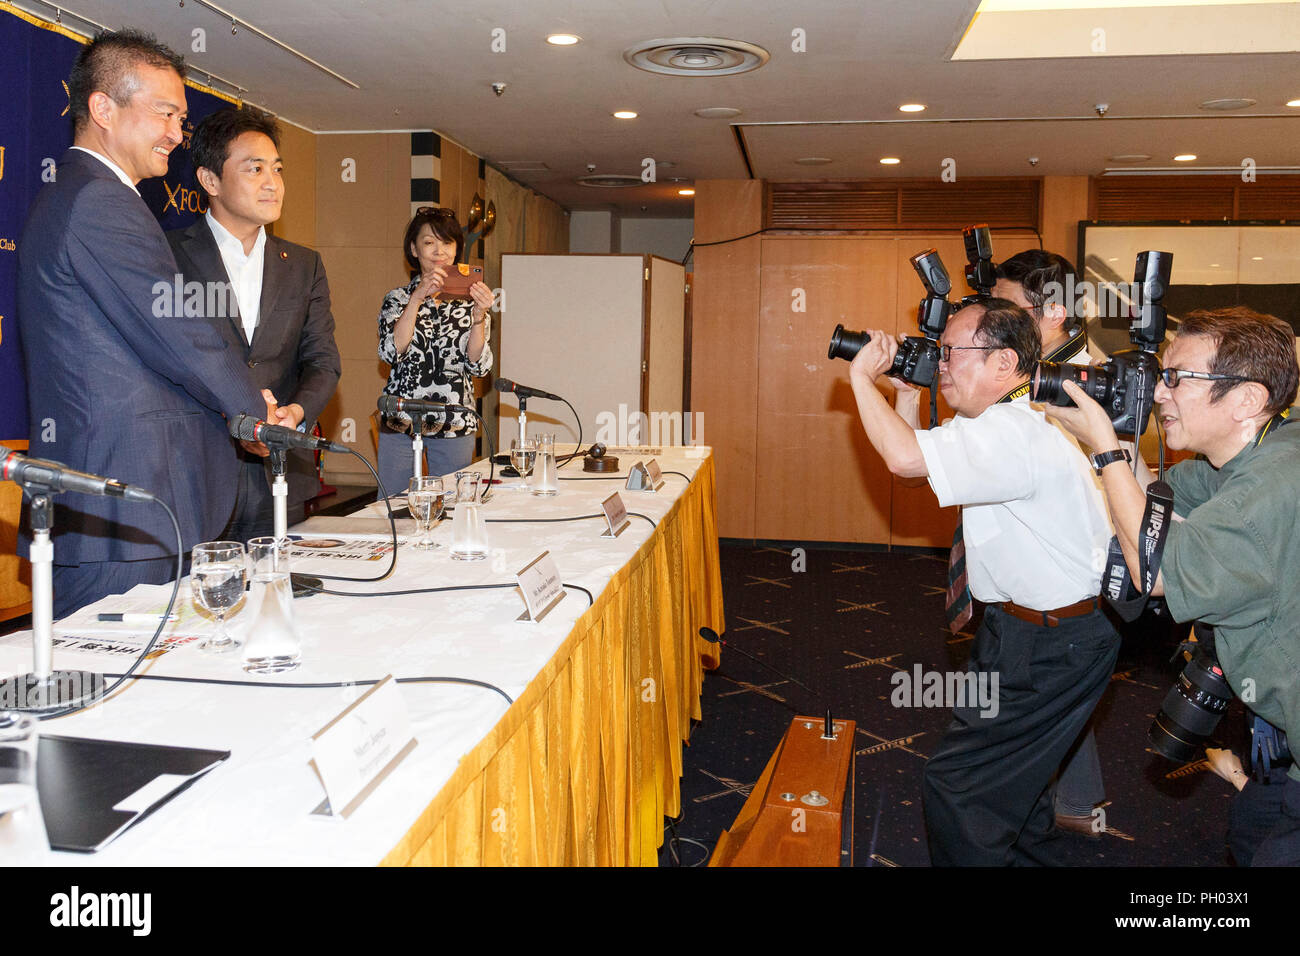 Tokyo, Japan. 29th Aug 2018. (L to R) Japanese politicians Keisuke Tsumura and Yuichiro Tamaki, both candidates for their party's leadership, pose for the cameras during a news conference at the Foreign Correspondents' Club of Japan on August 29, 2018, Tokyo, Japan. Tamaki and Tsumura answered questions about the coming leadership election for the Democratic Party For the People, which is set for September 4. Credit: Rodrigo Reyes Marin/AFLO/Alamy Live News Stock Photo